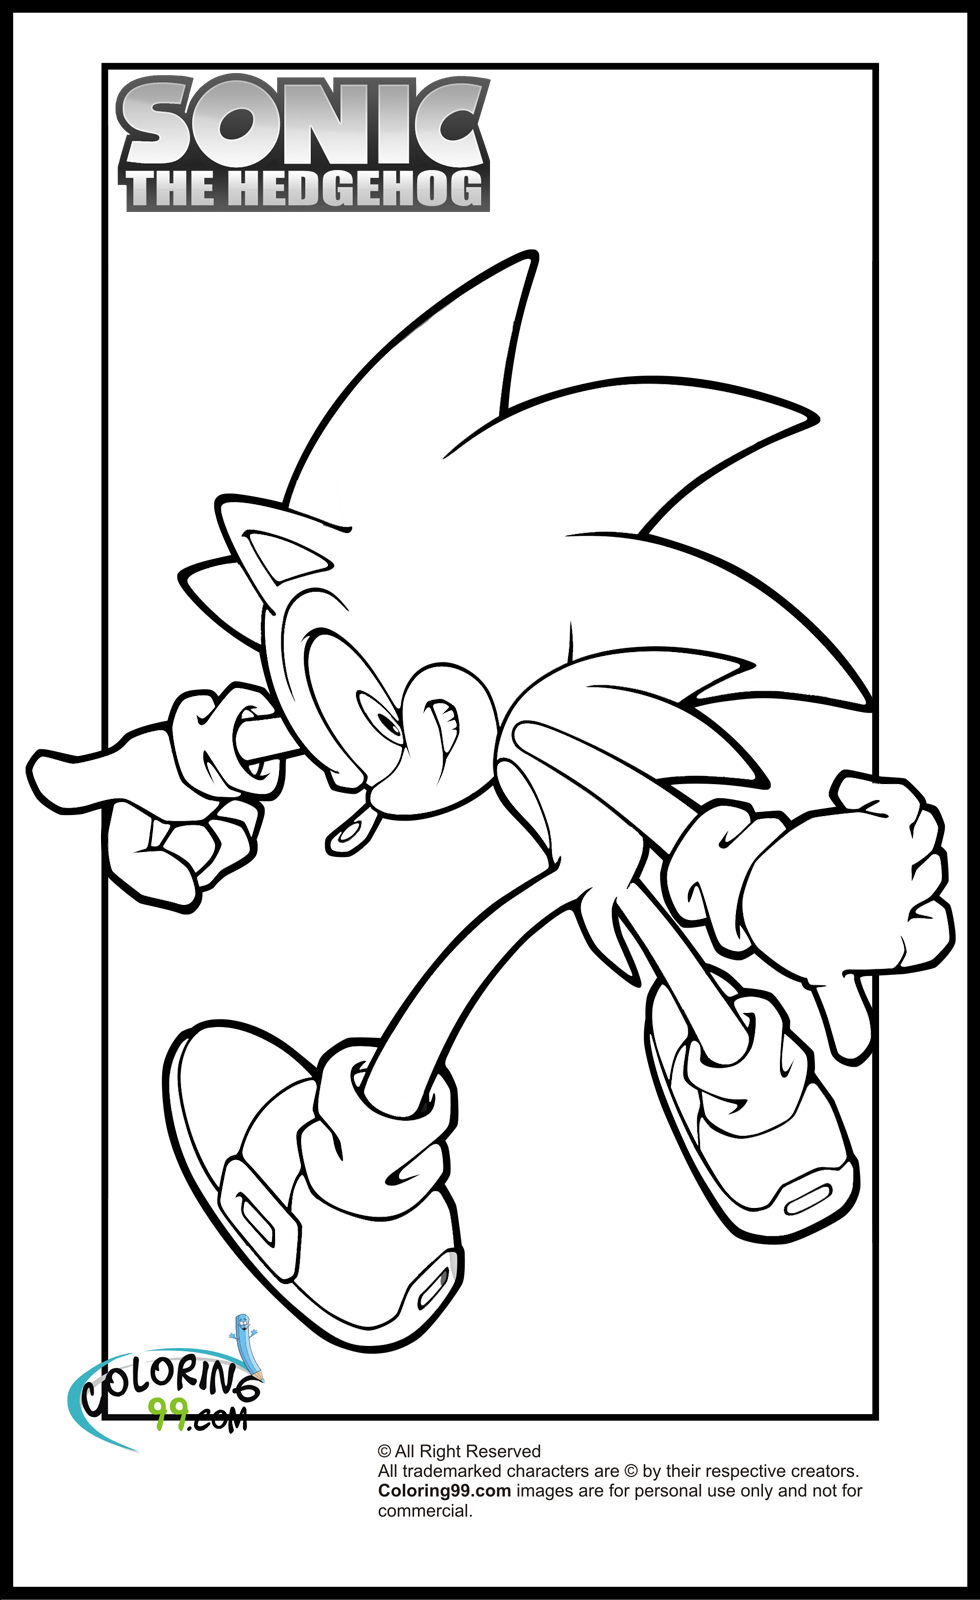 Sonic Coloring Pages | Team colors